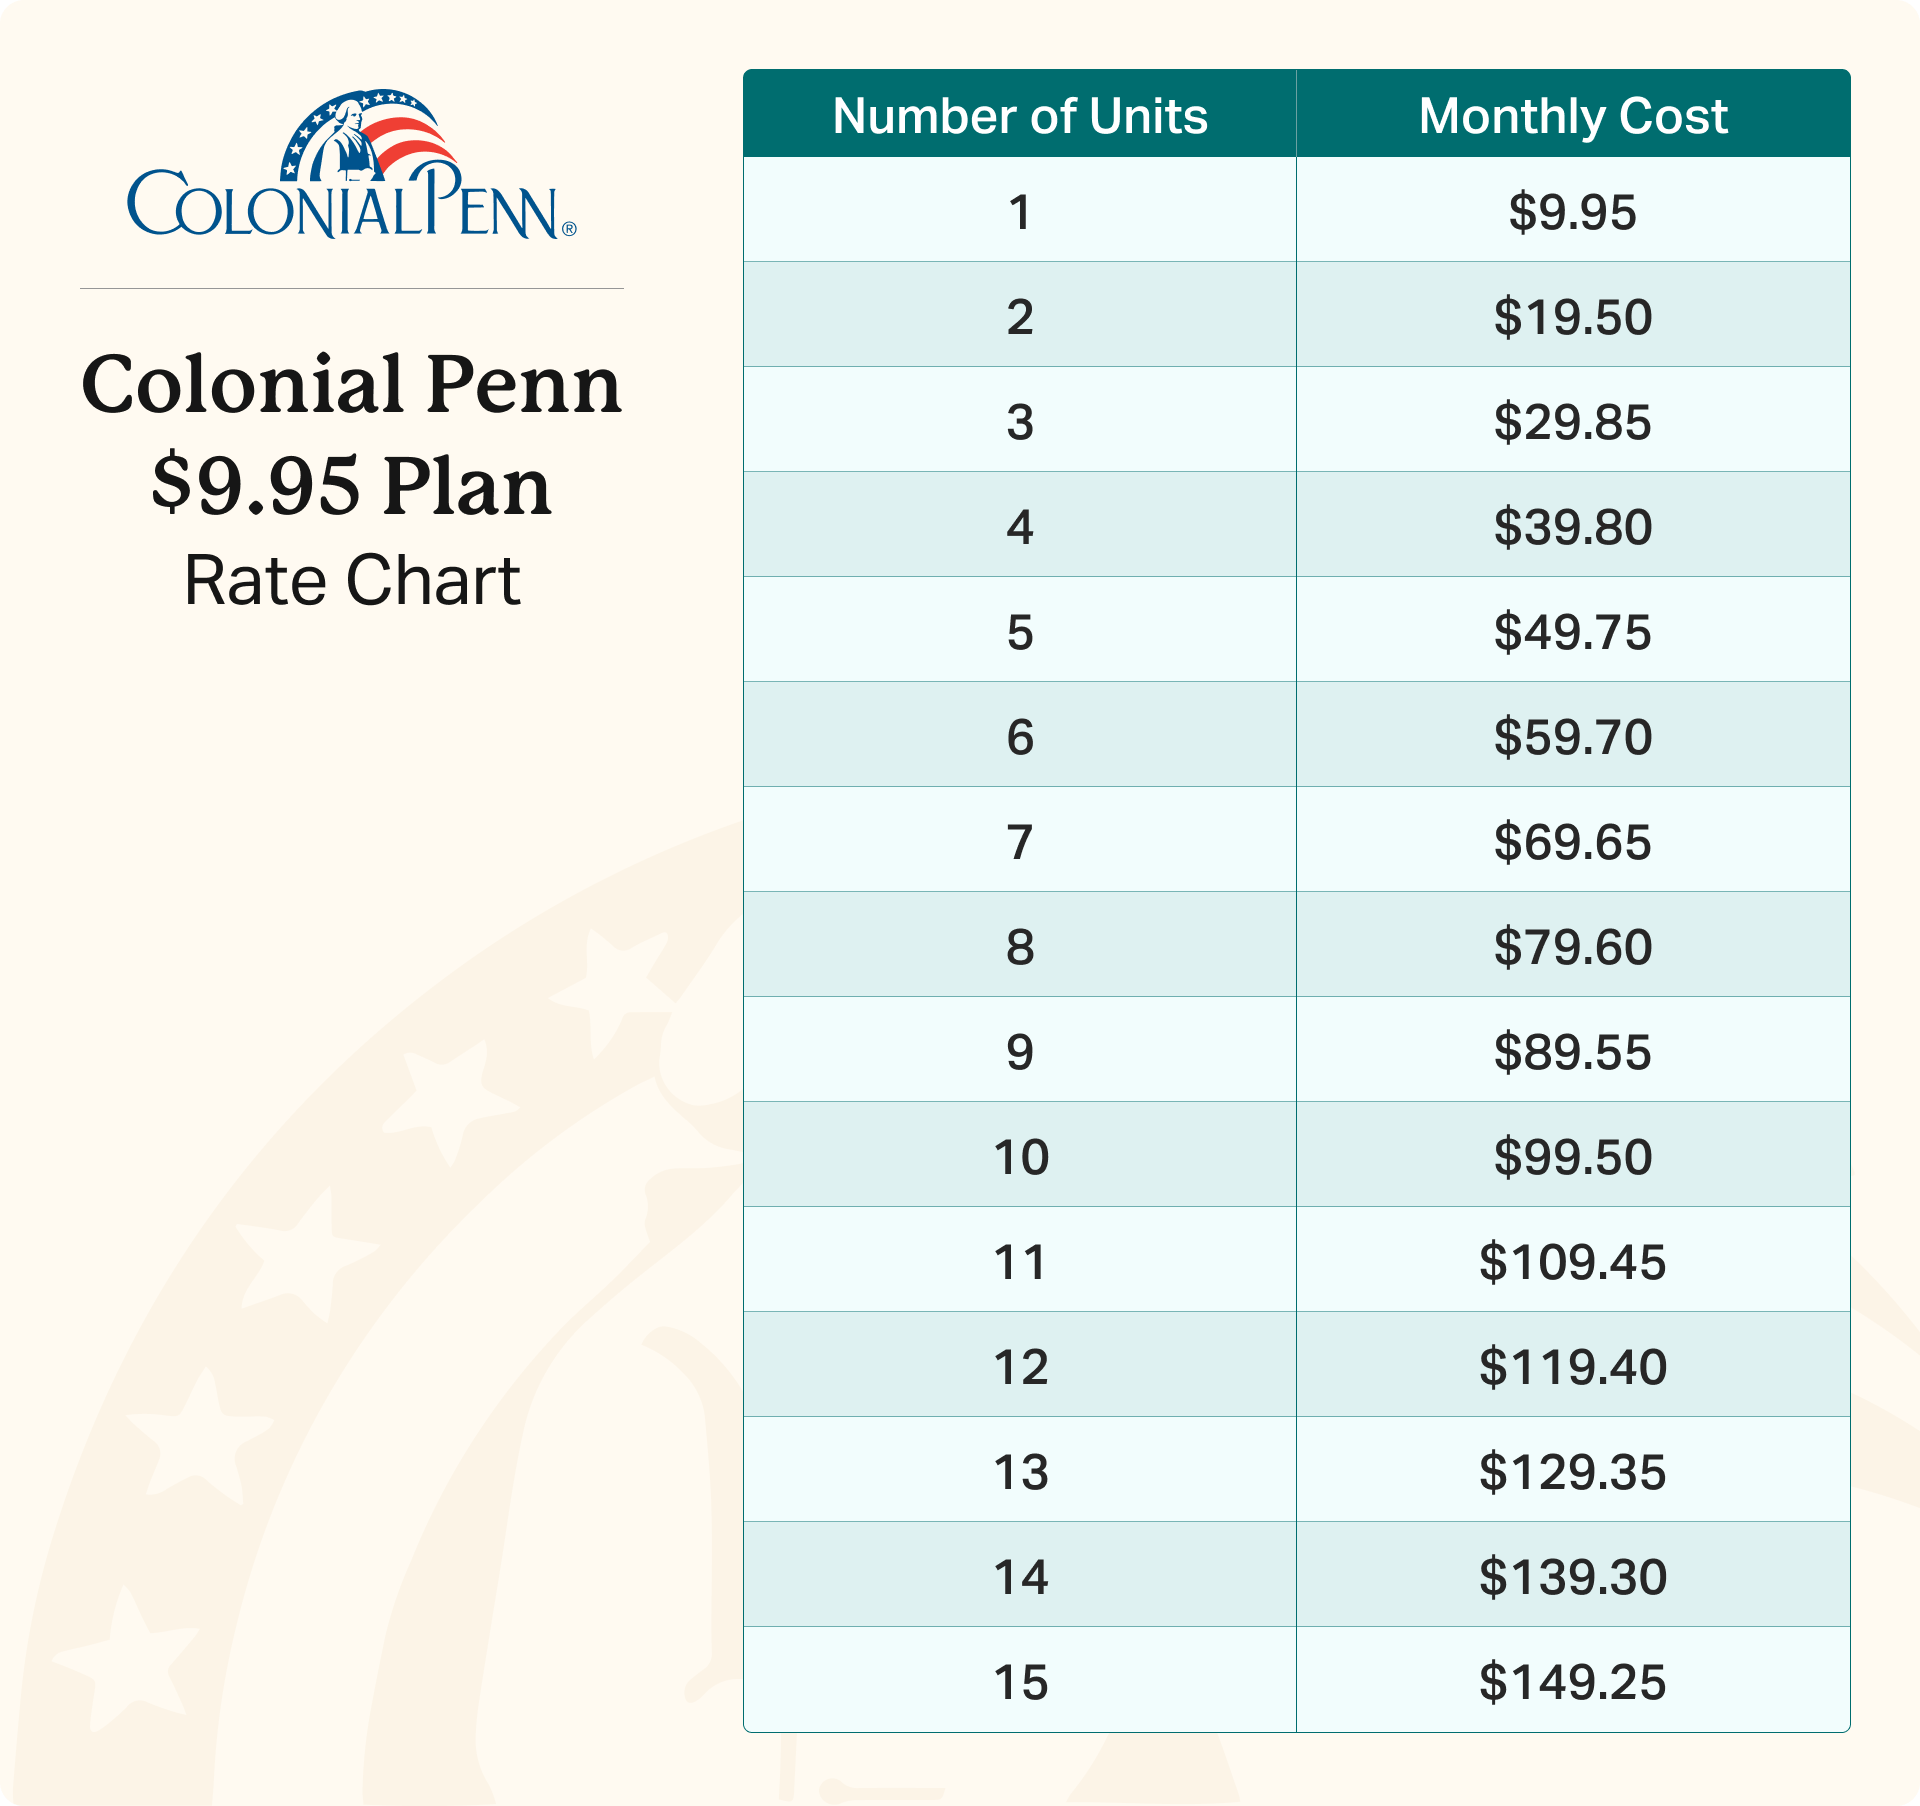 Colonial Penn $9.95 rate chart